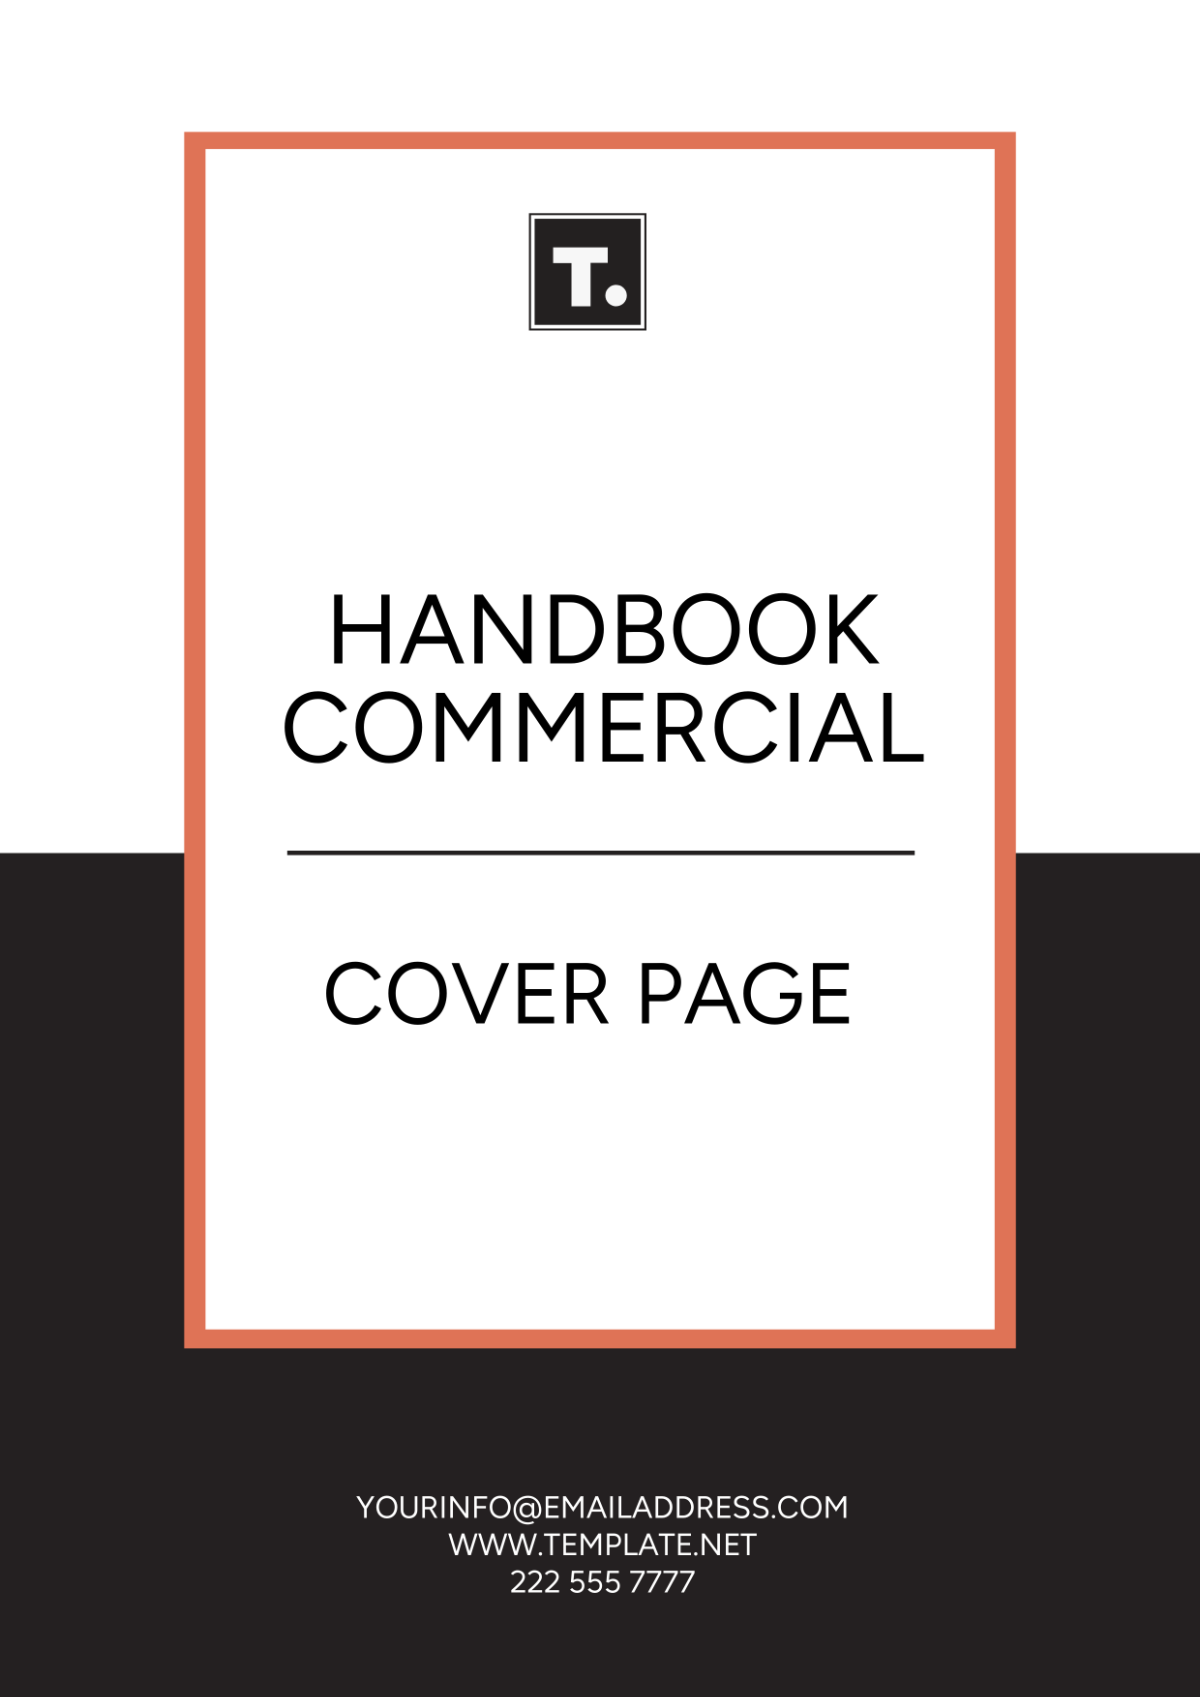 Free Handbook Commercial Cover Page Template